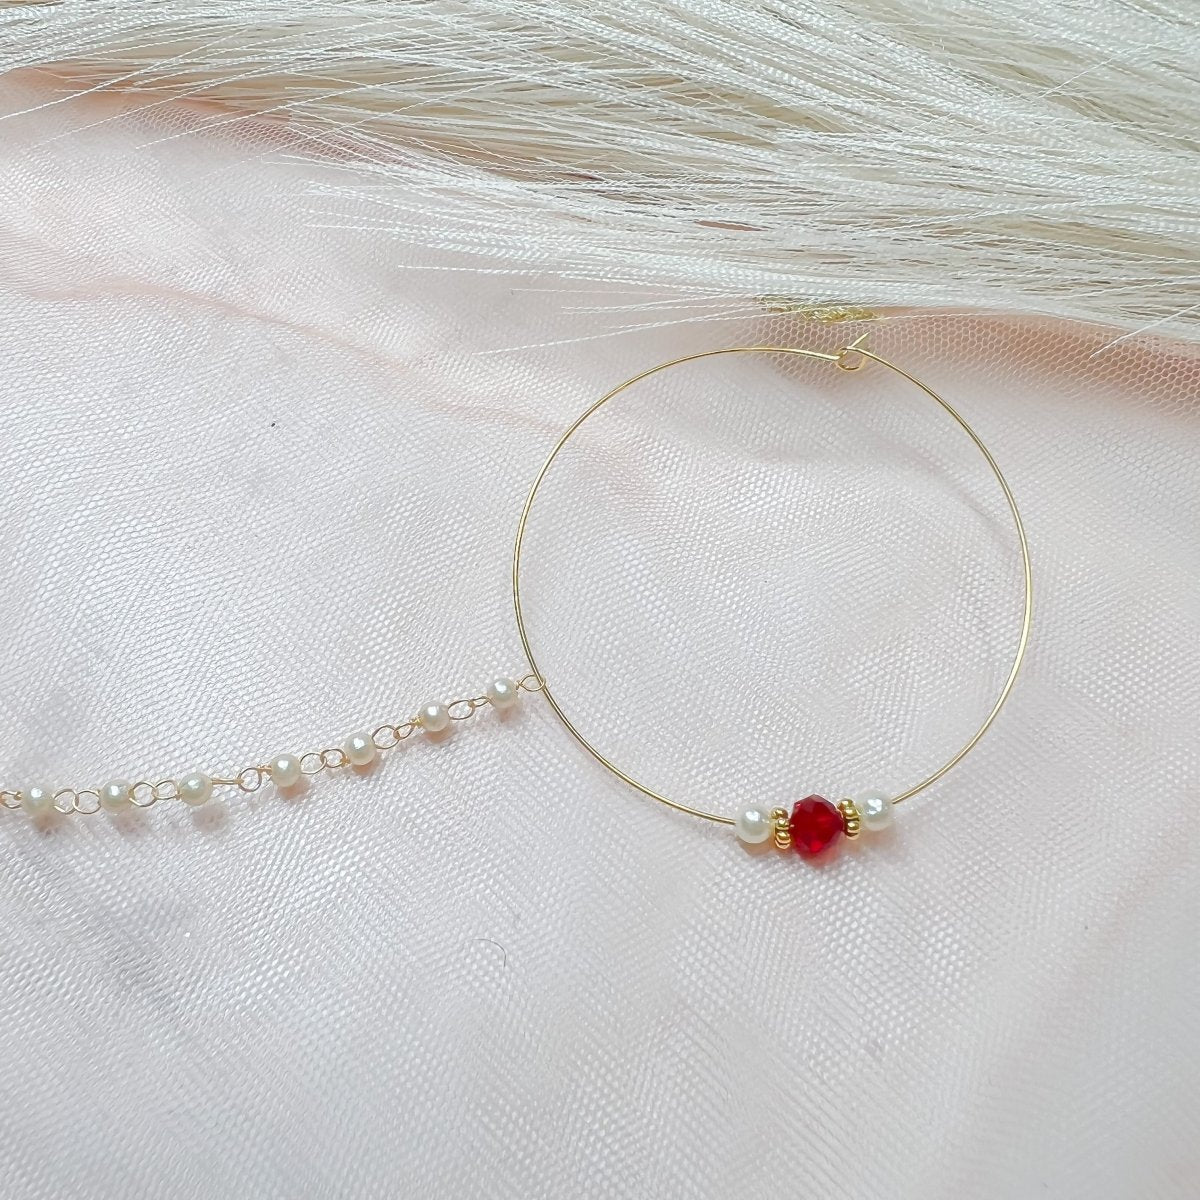 Red Bead Nose ring - Pierced - SOKORA JEWELSRed Bead Nose ring - Piercednose rings